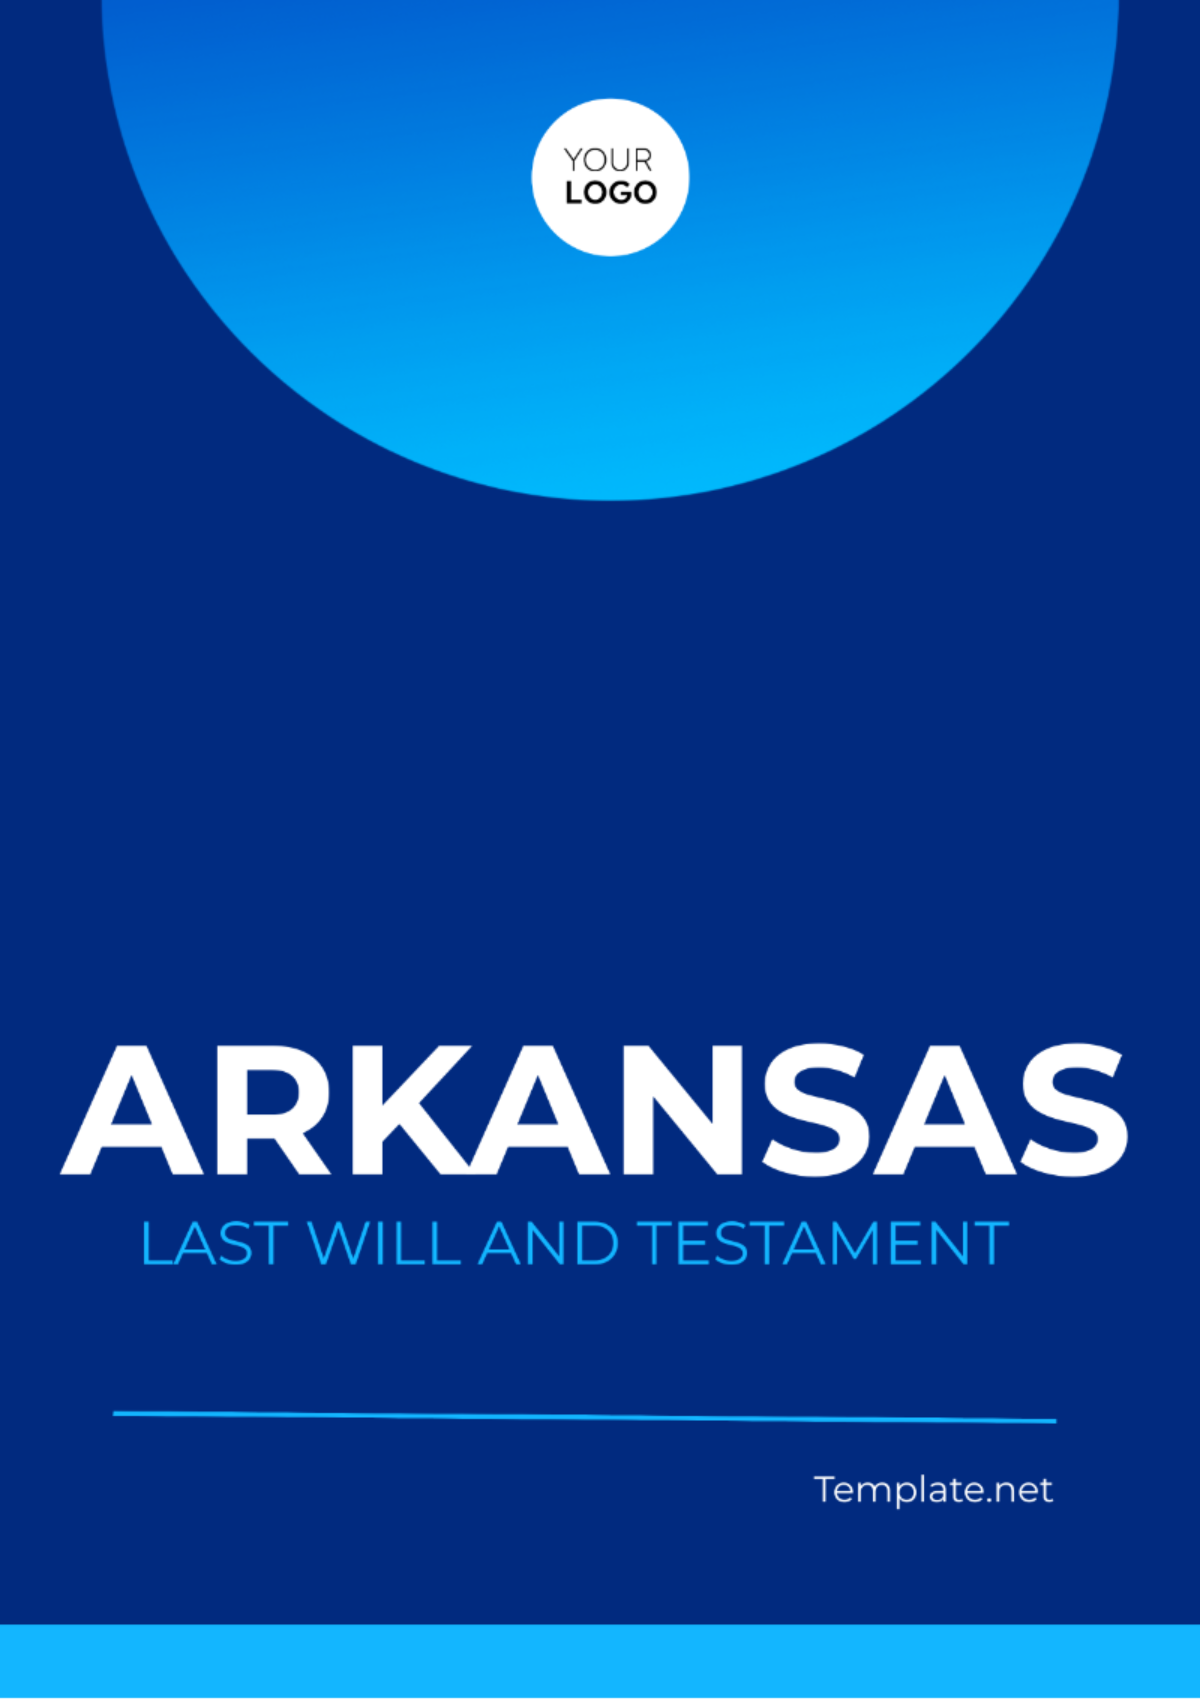 Free Arkansas Last Will and Testament Template